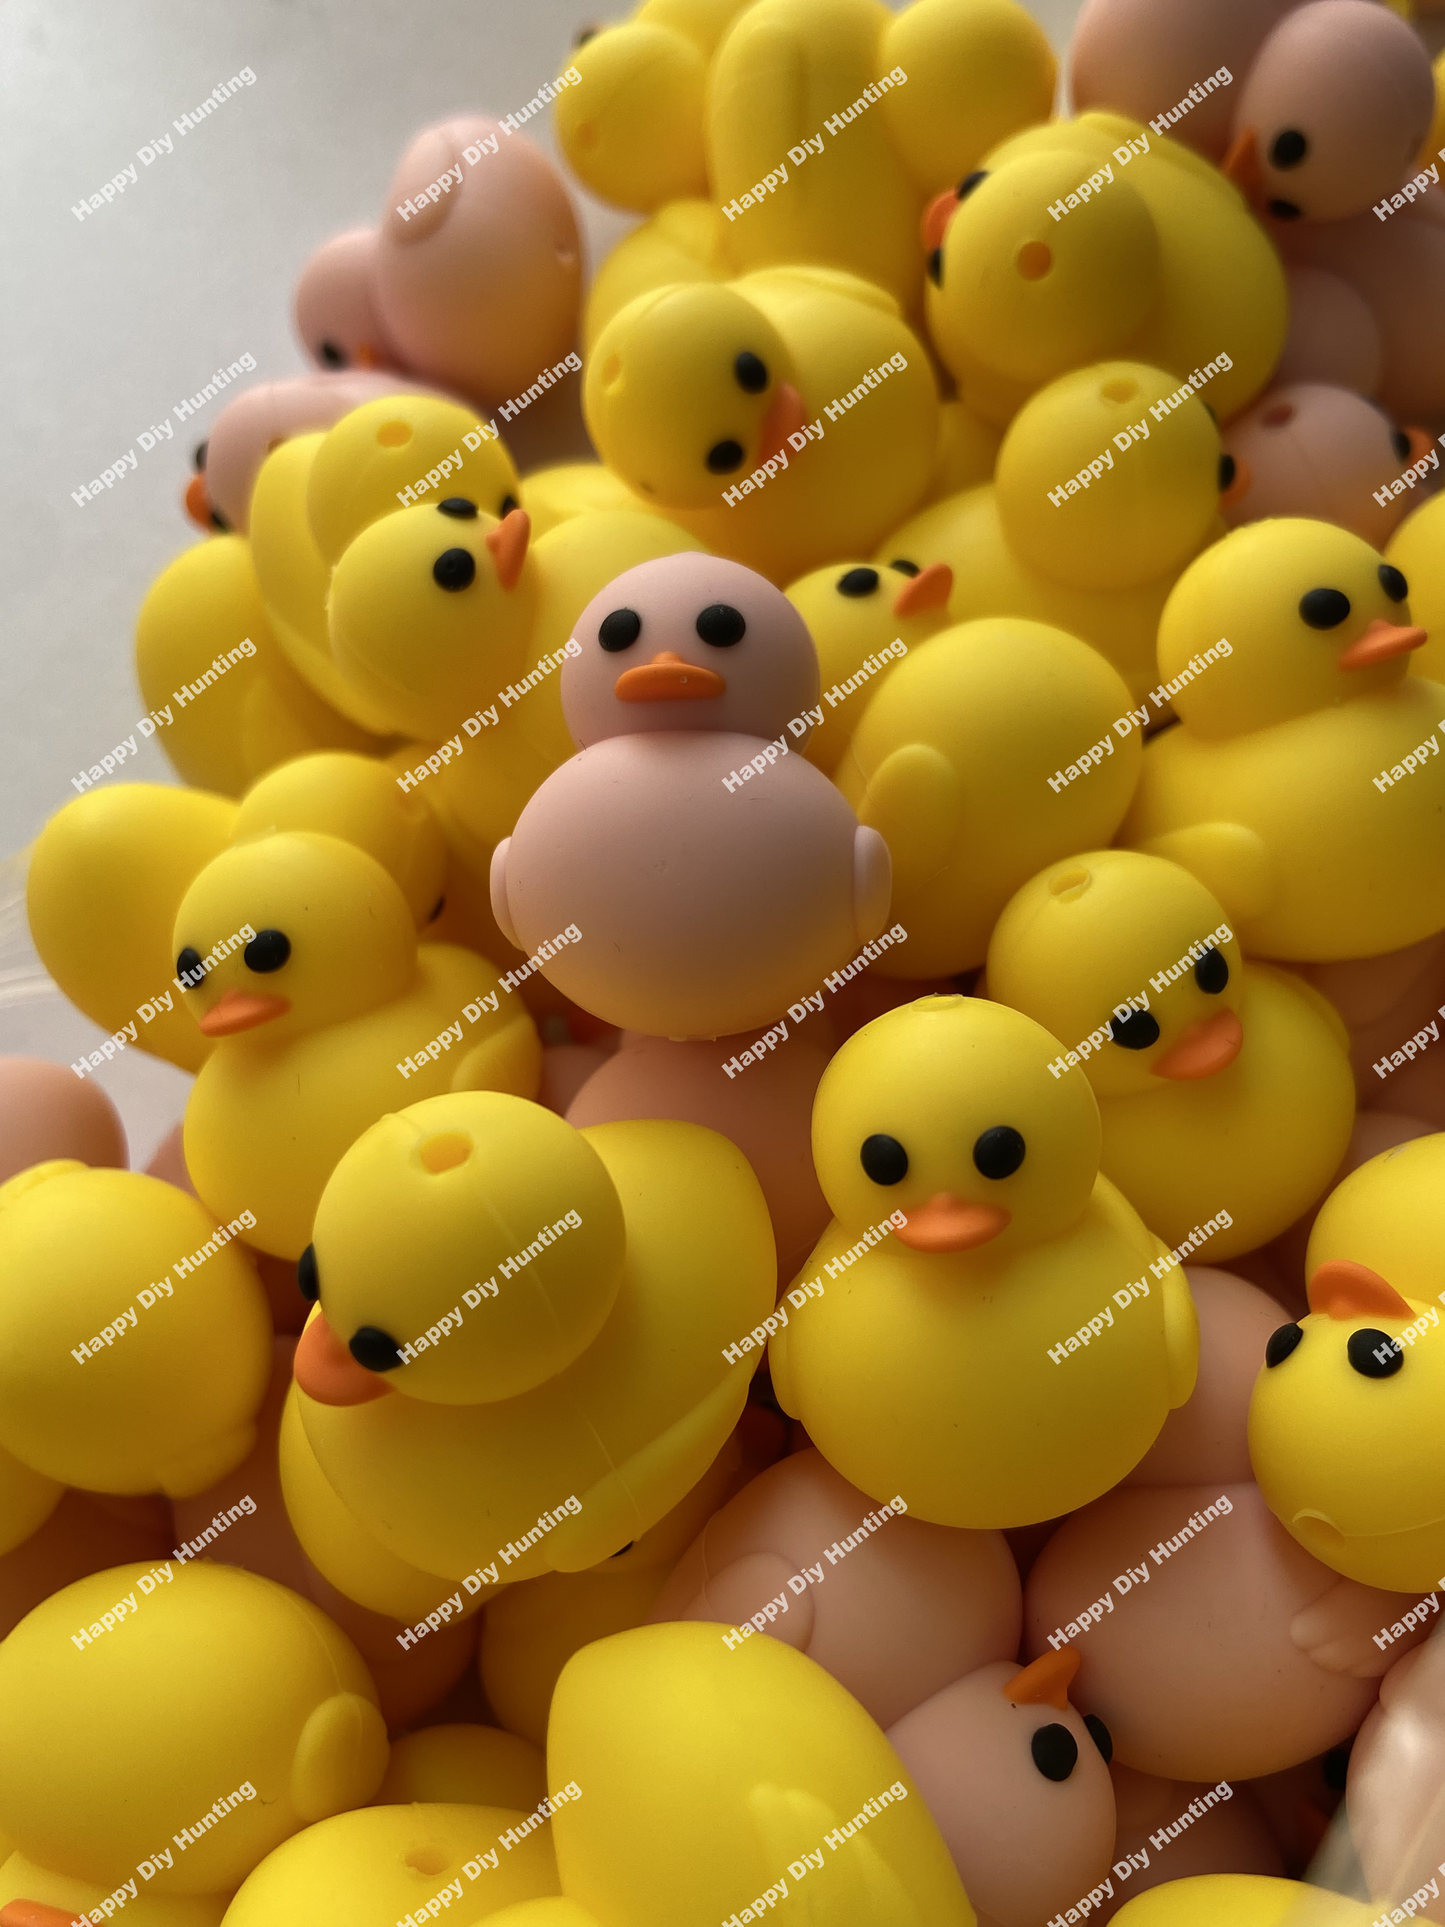 High Quality 3D Yellow Duck Silicone Focal Bead for Beadable Pens, Stylus, Pencils, Keychains and More.